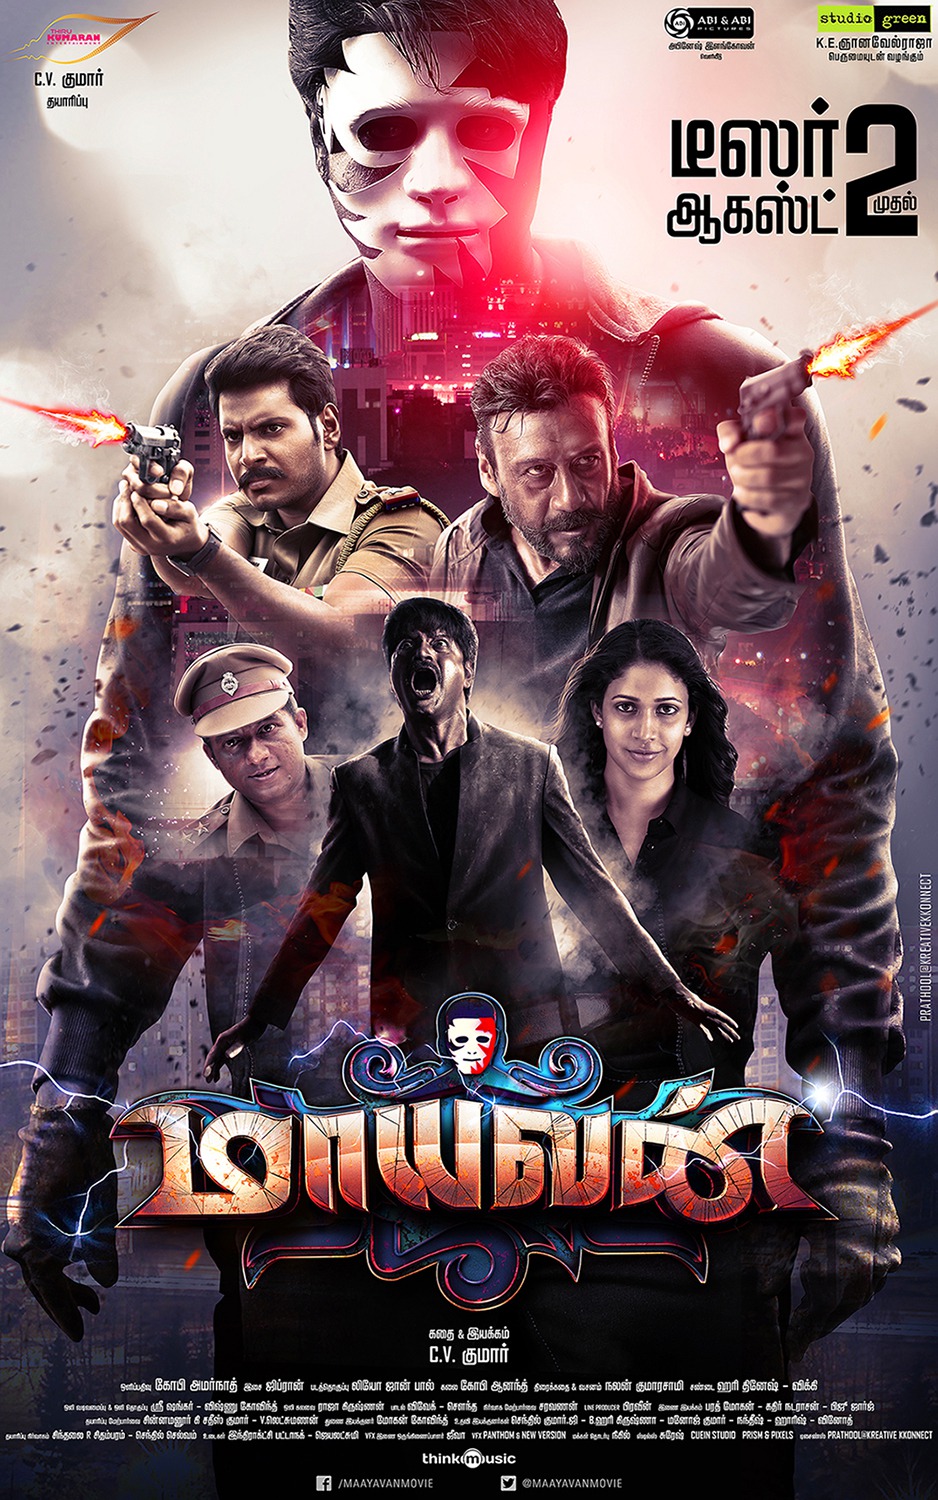 Extra Large Movie Poster Image for Mayavan 